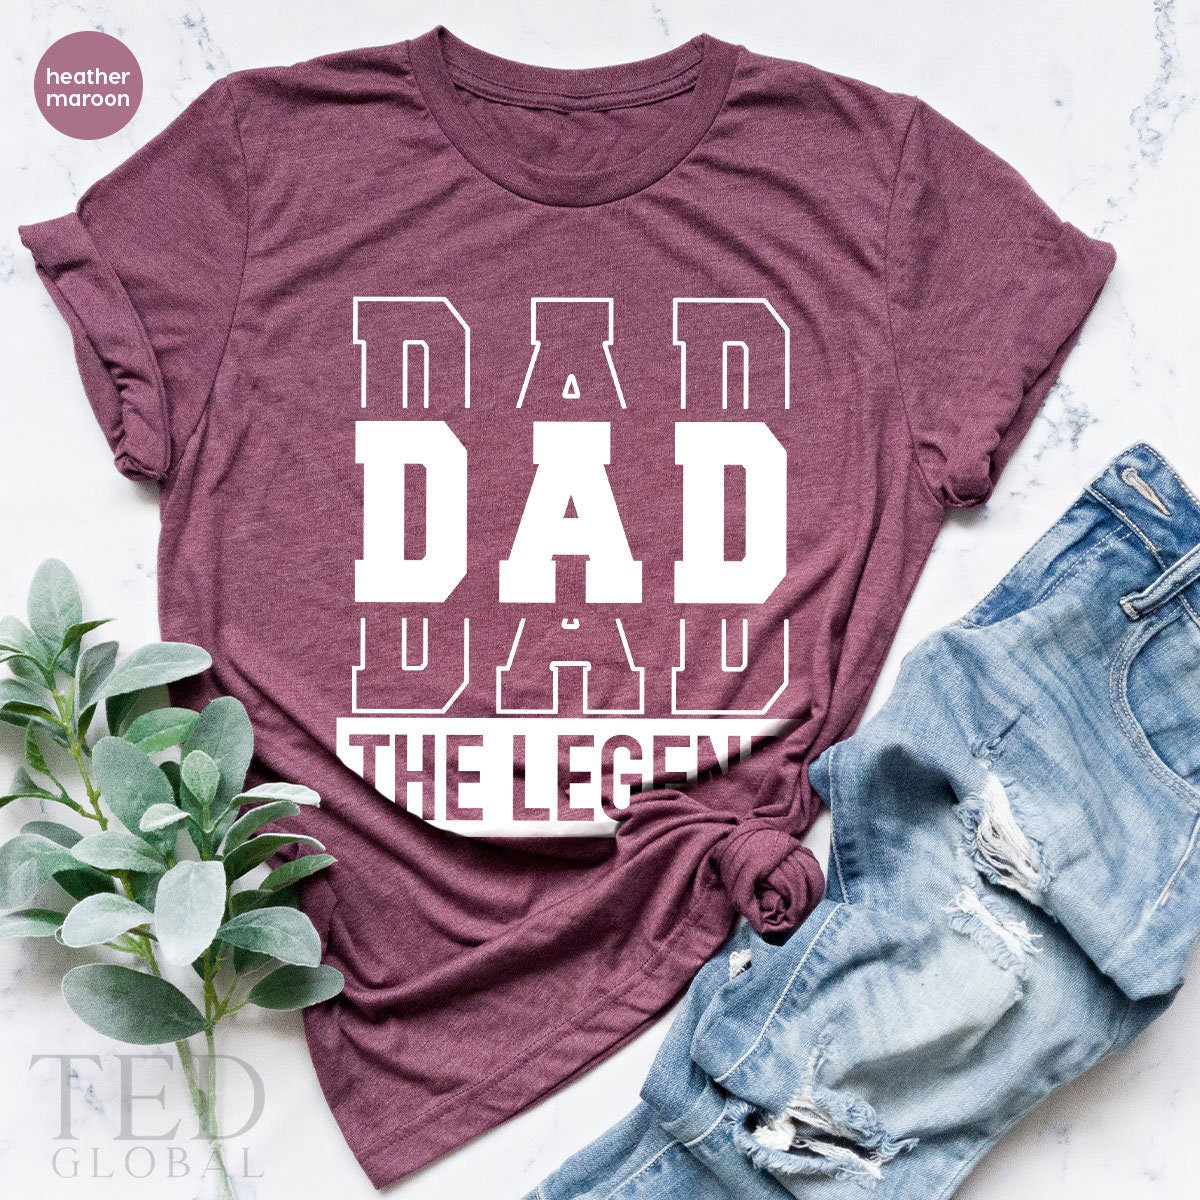 Dad The Legend, Dad Gift, Gift For Dad, Fathers Day Shirt, Fathers Day Gift, Dad Gift, Dad Birthday Gift, Best Dad Shirt, Daddy Shirt - Fastdeliverytees.com